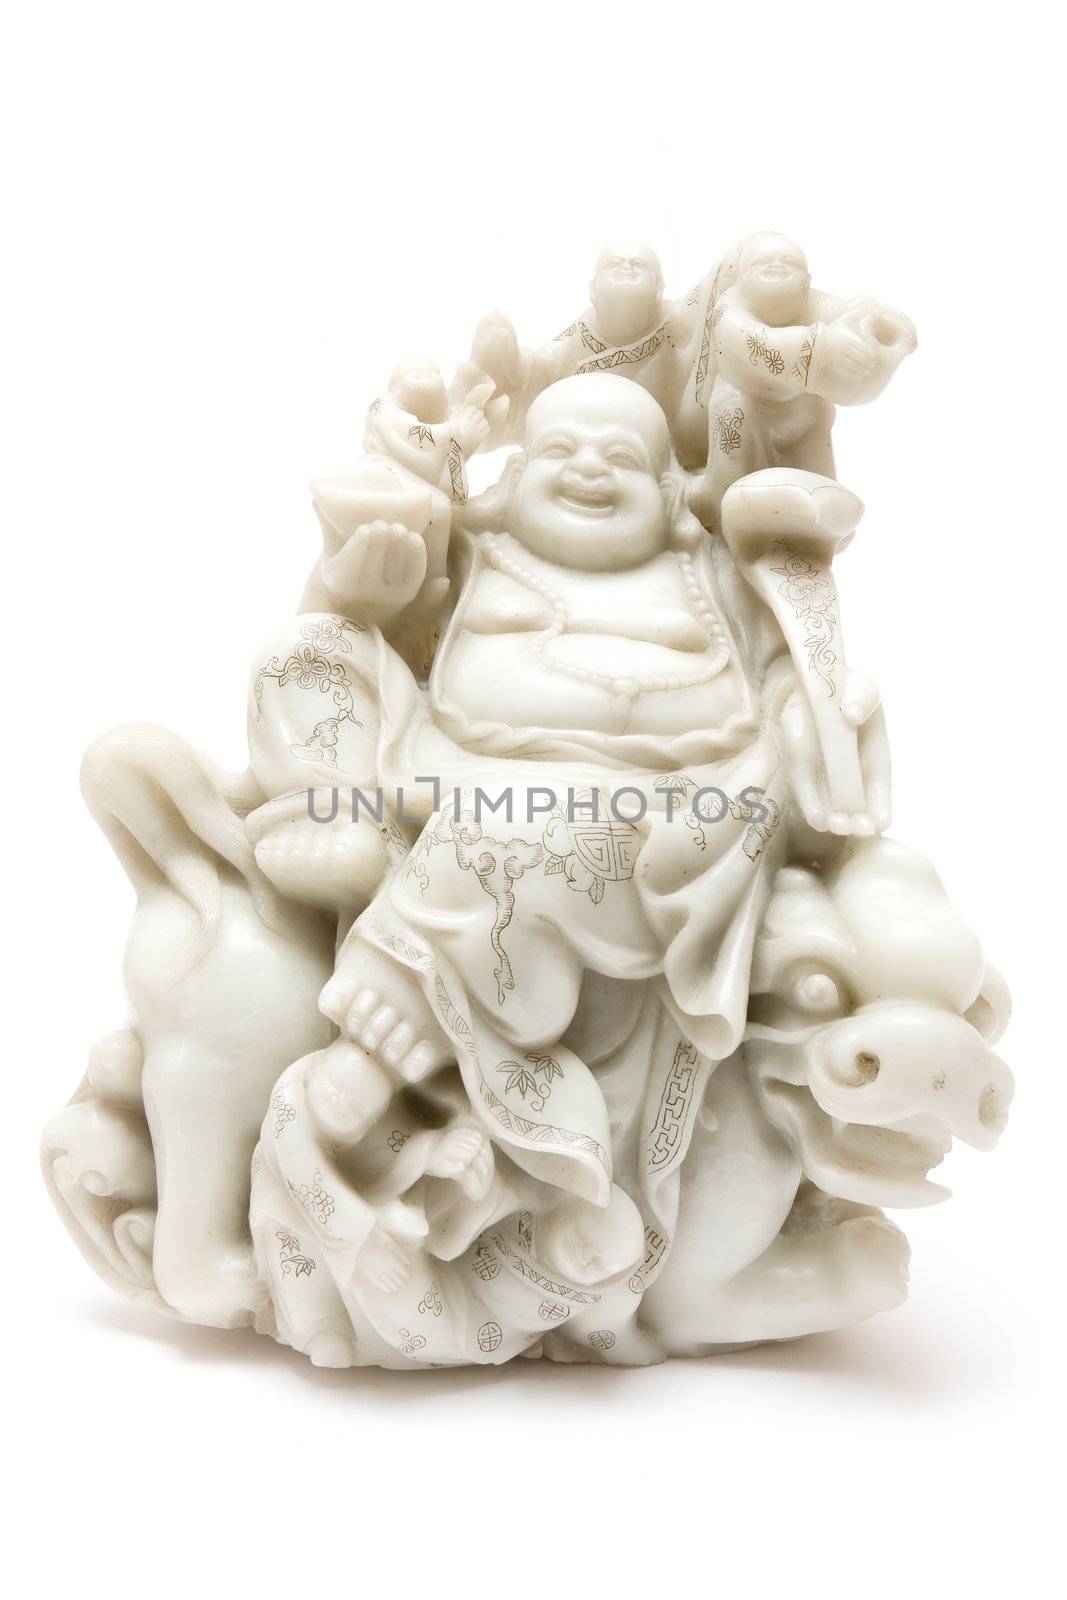 Jade buddha sitting on a dragon. Antique statue carved at the beginning of the 20th century. Isolated on a white background.